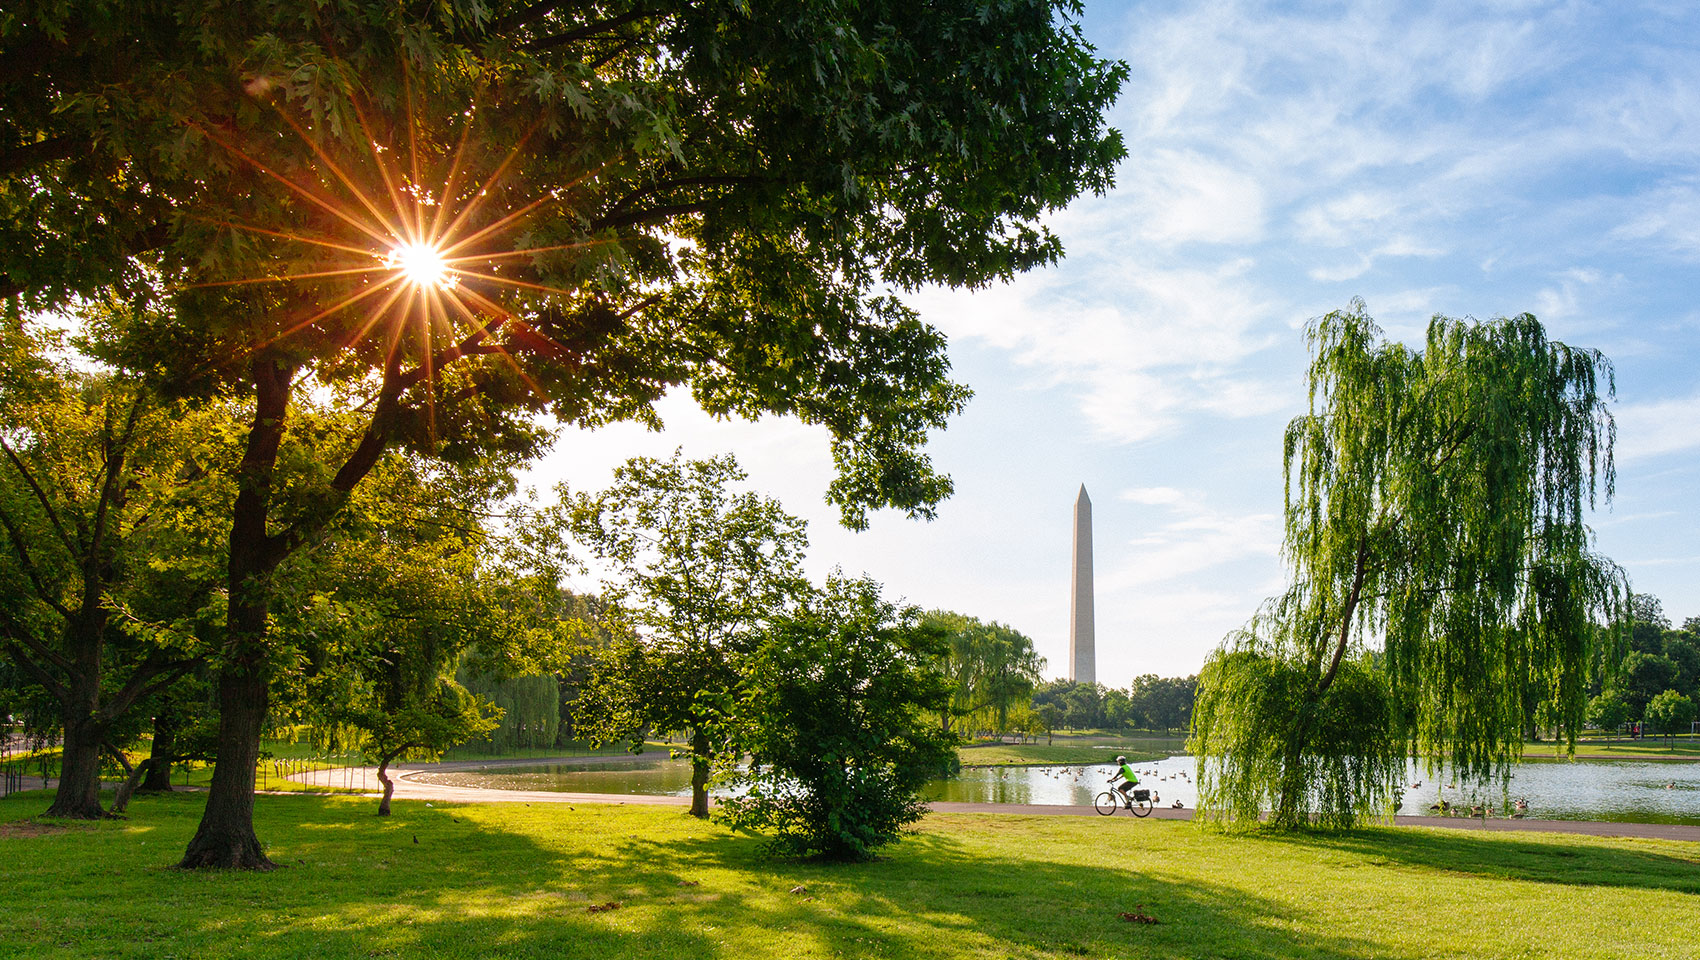 park with large trees and the Washington monument in the background